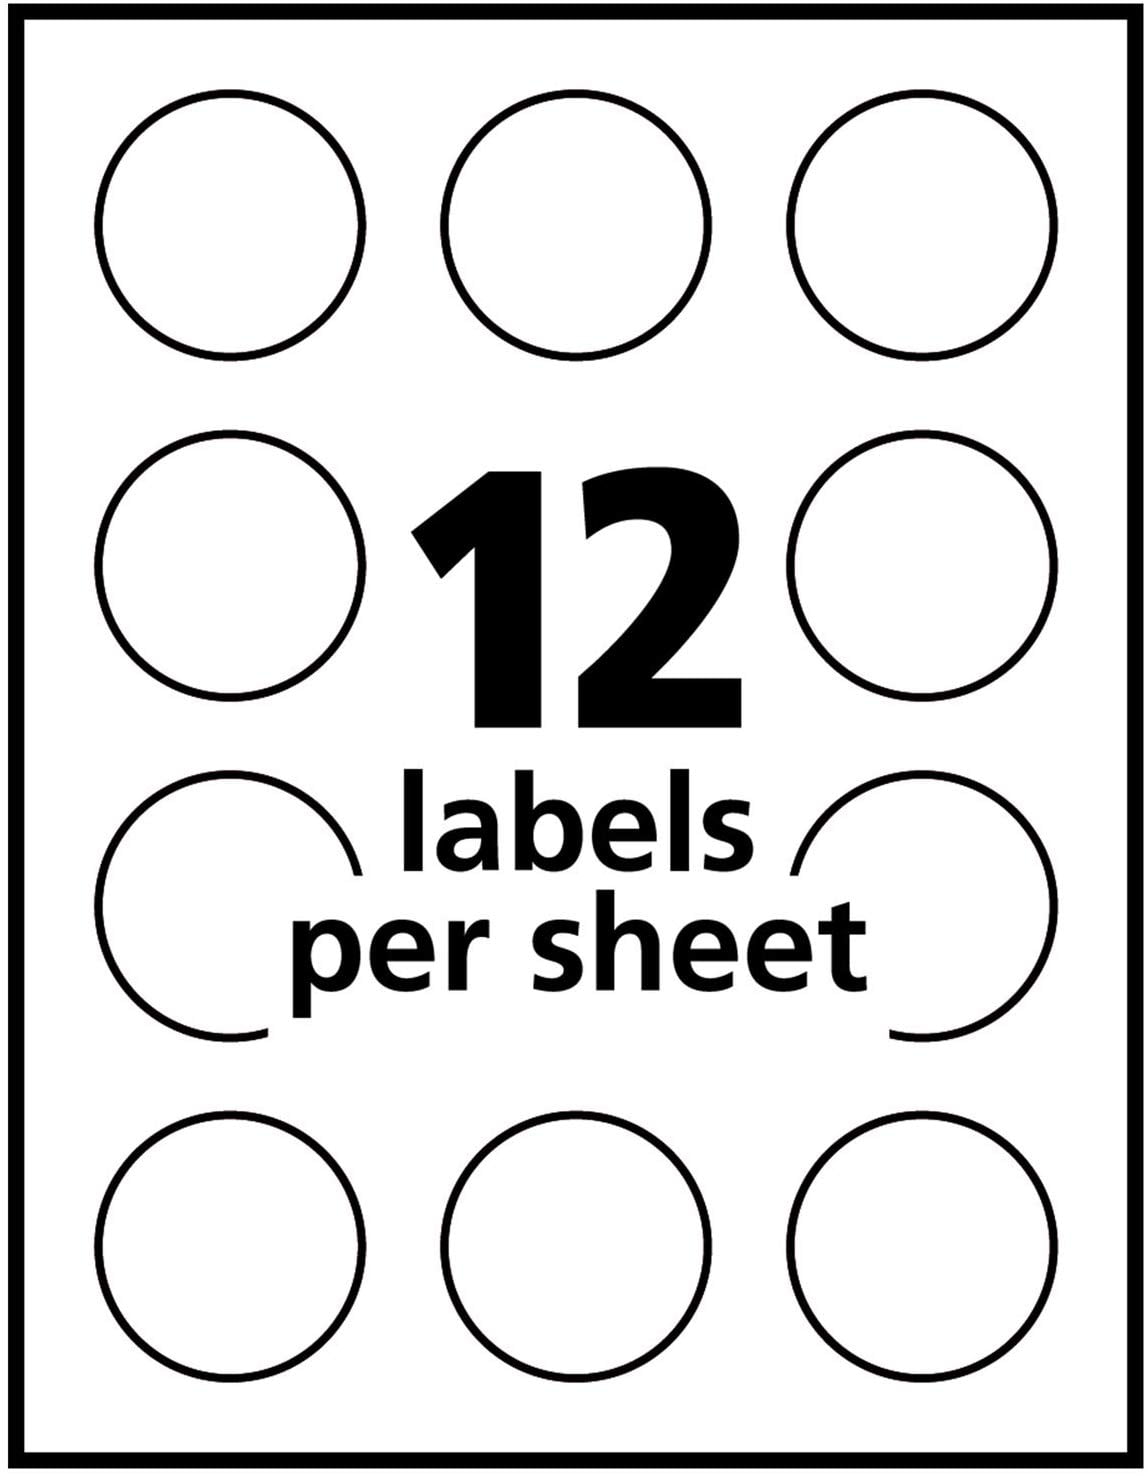 avery-2-inch-round-labels-for-laser-inkjet-printers-22877-300-labels